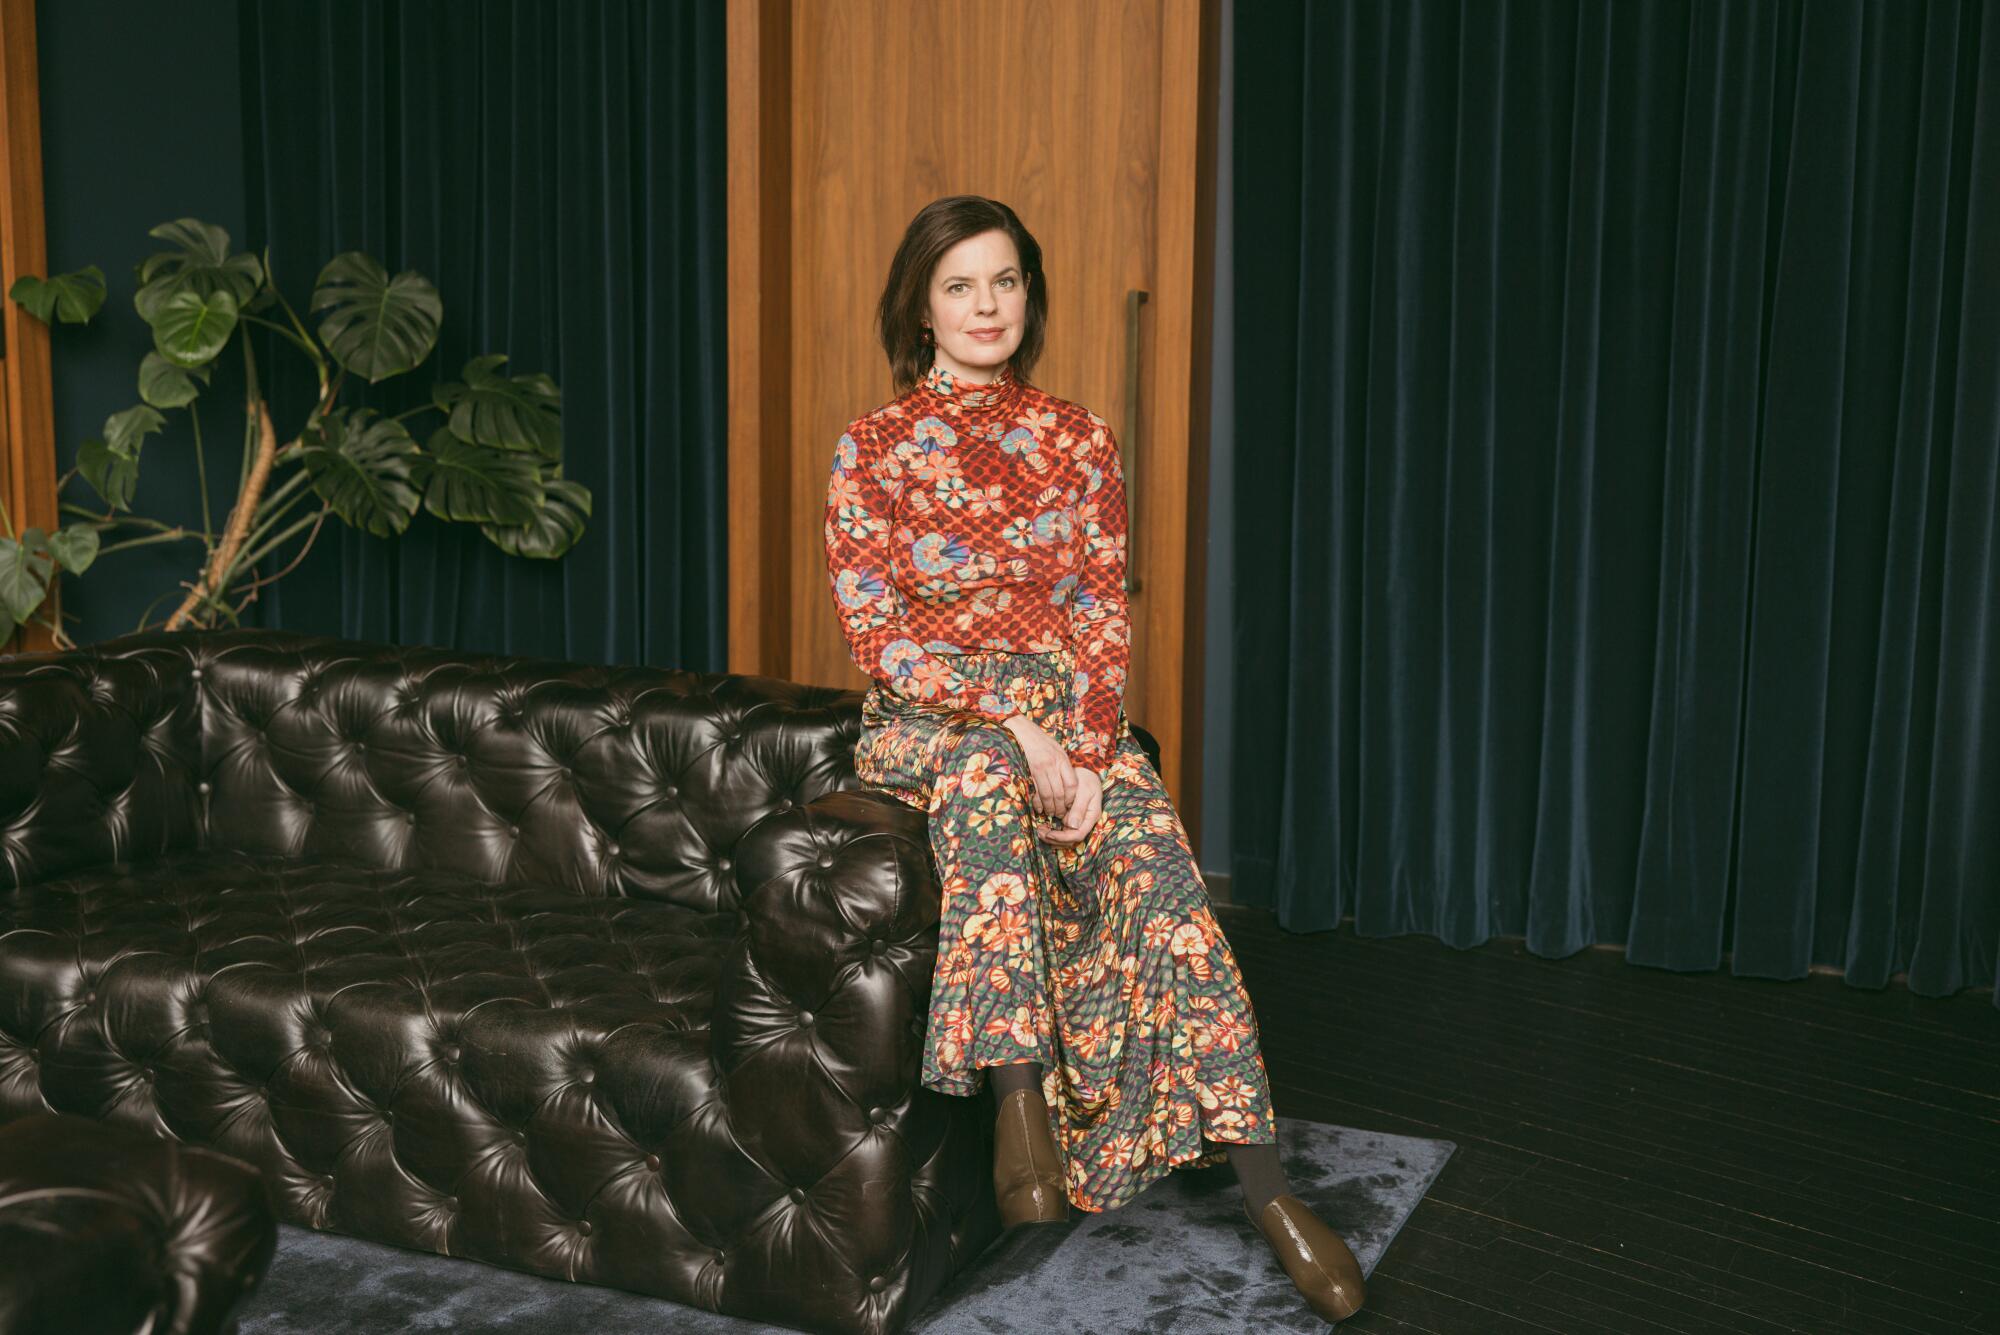 A woman in a floral top and long skirt is sitting on the edge of a brown leather sofa.